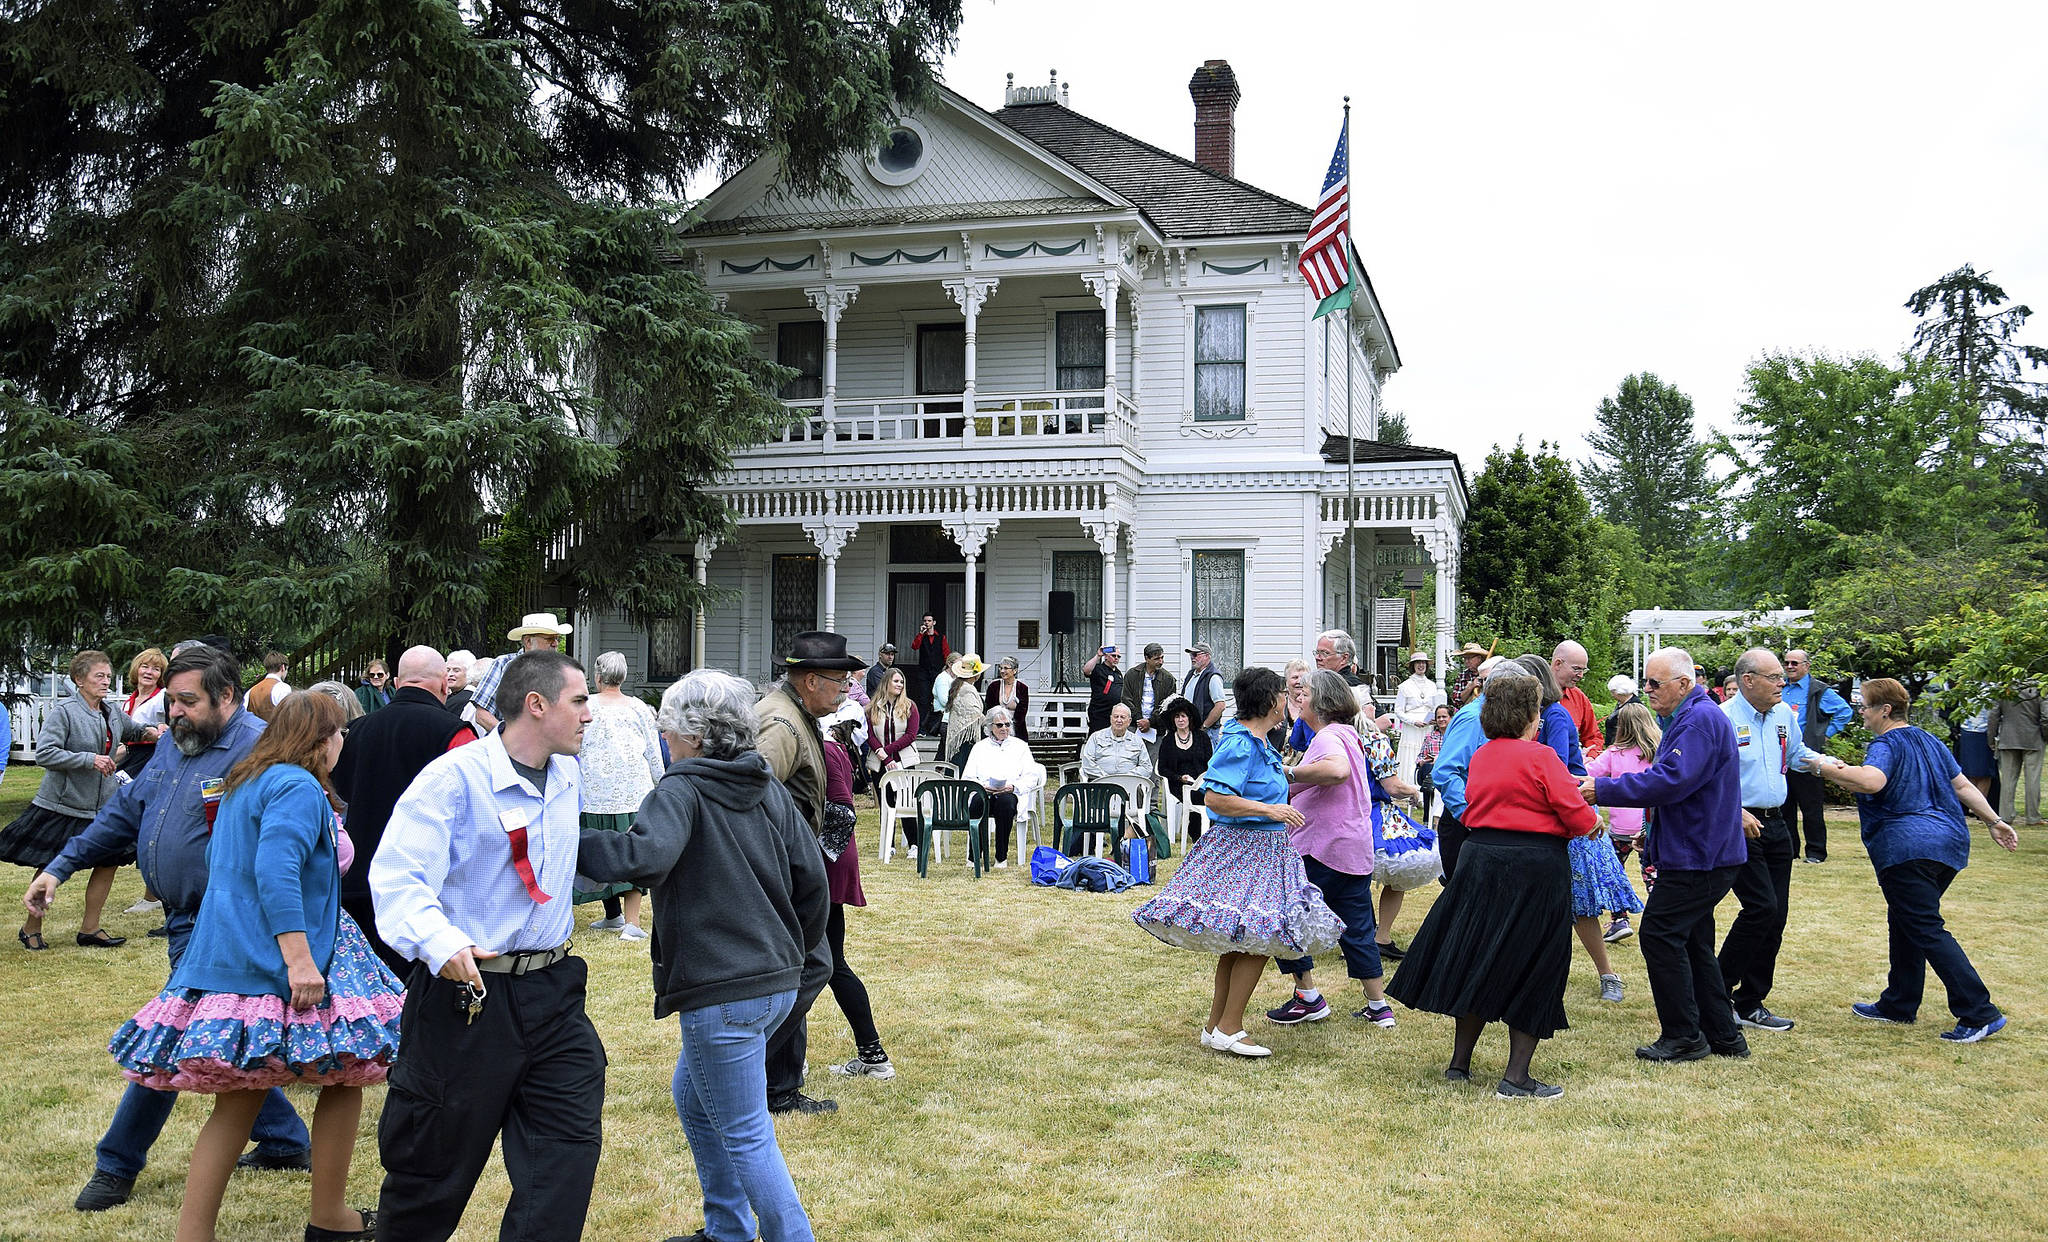 People square dancing in front of the Neely Mansion